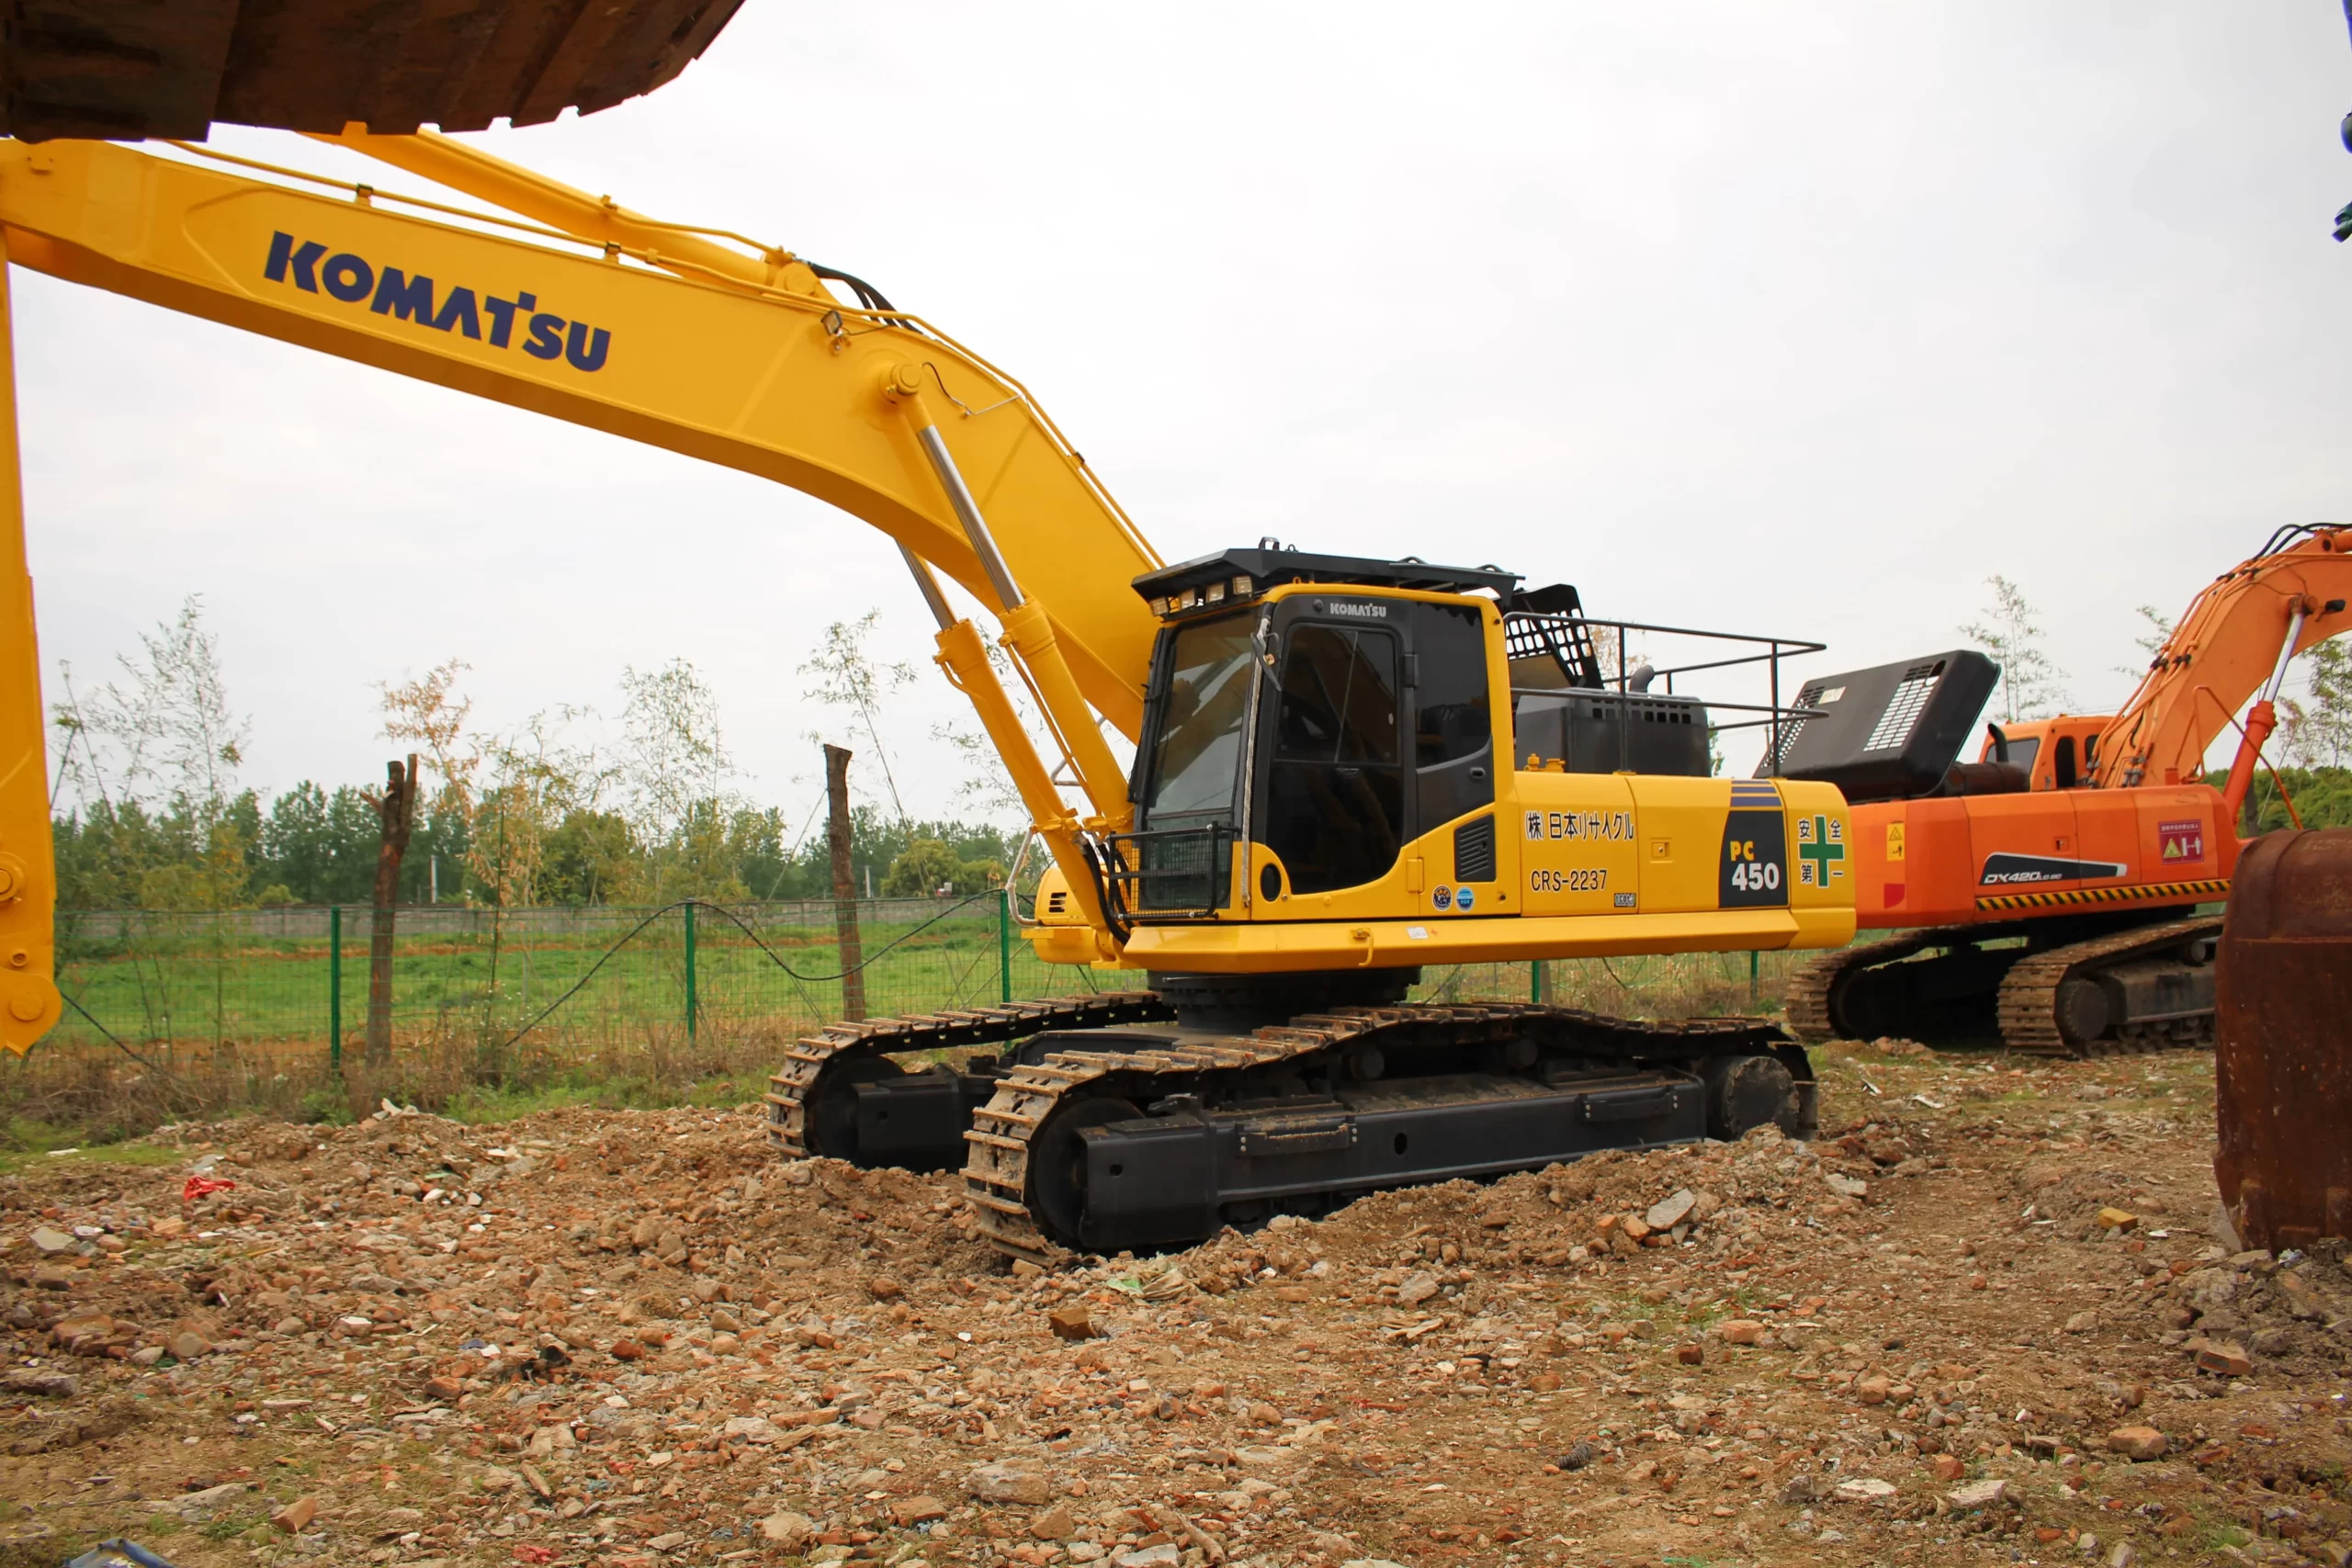 What is the average lifespan of an excavator?